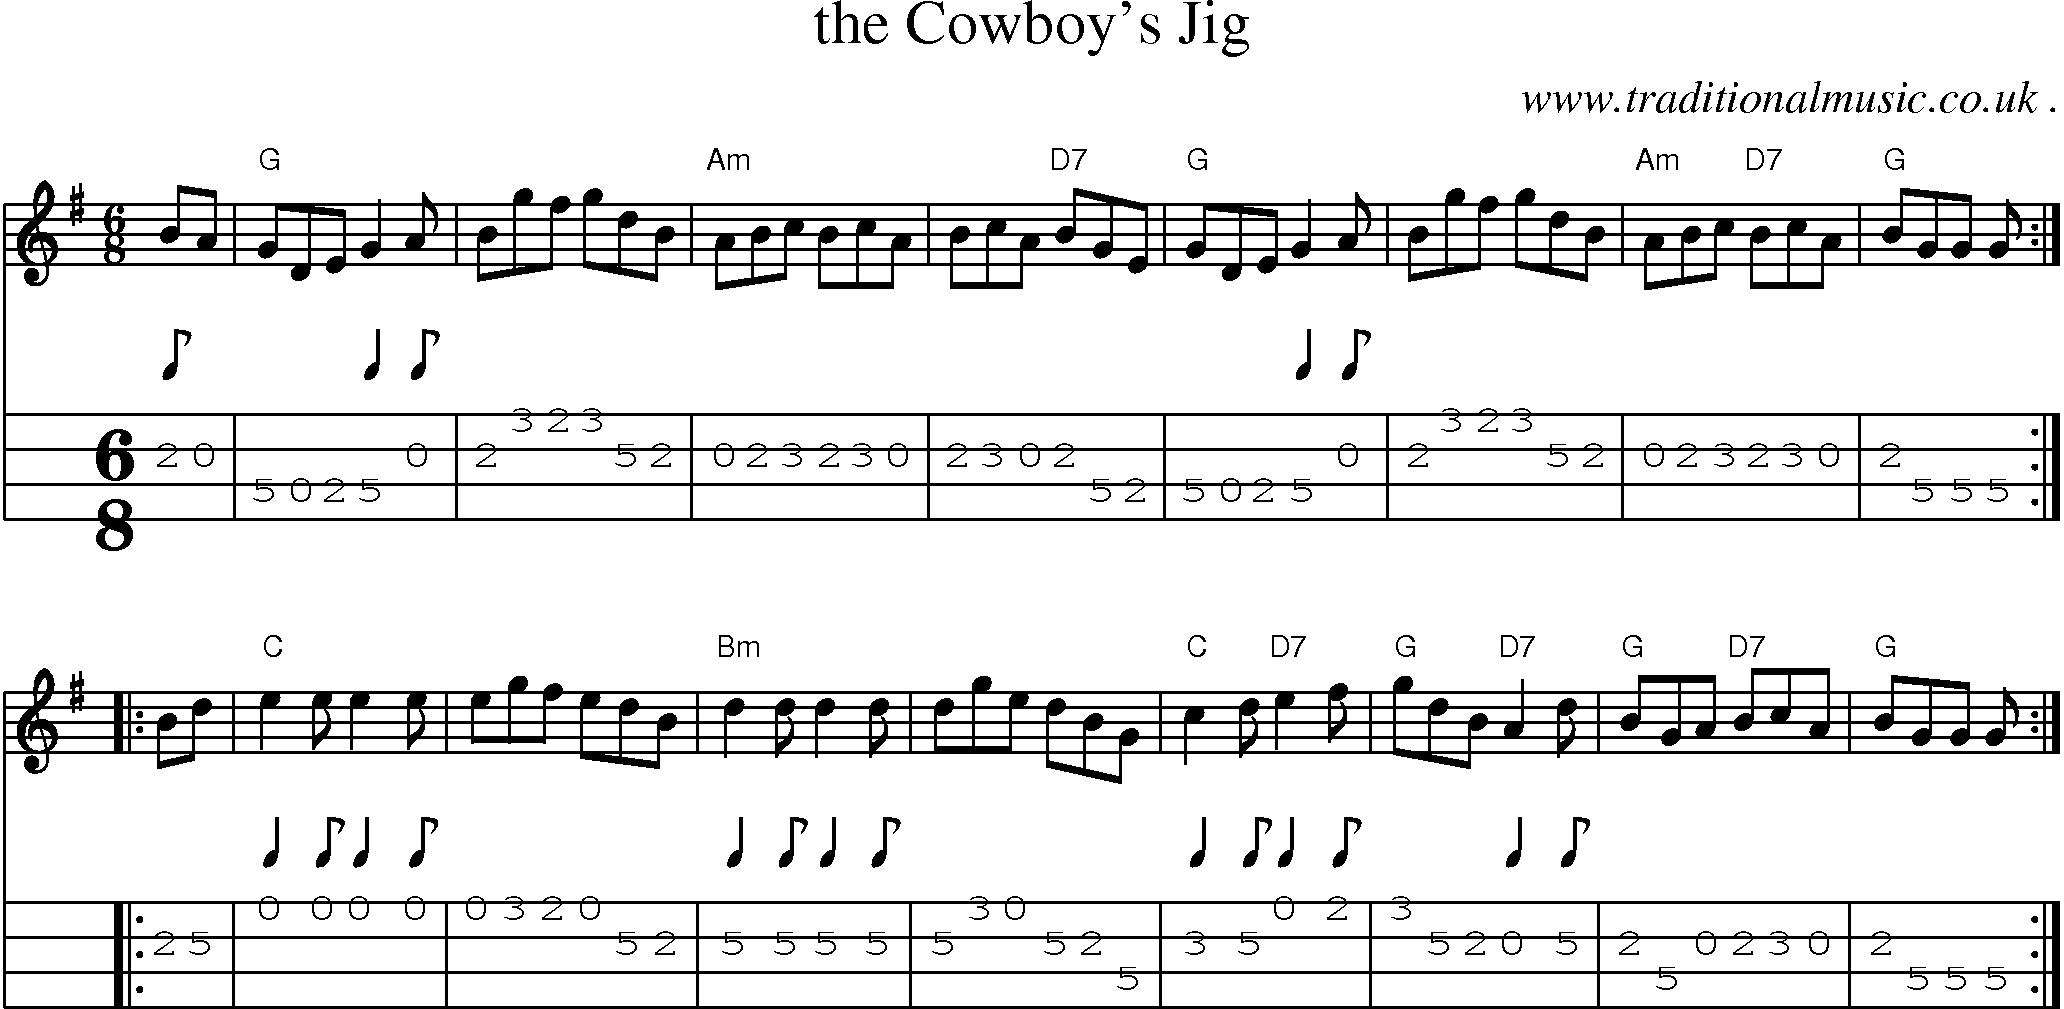 Sheet-music  score, Chords and Mandolin Tabs for The Cowboys Jig